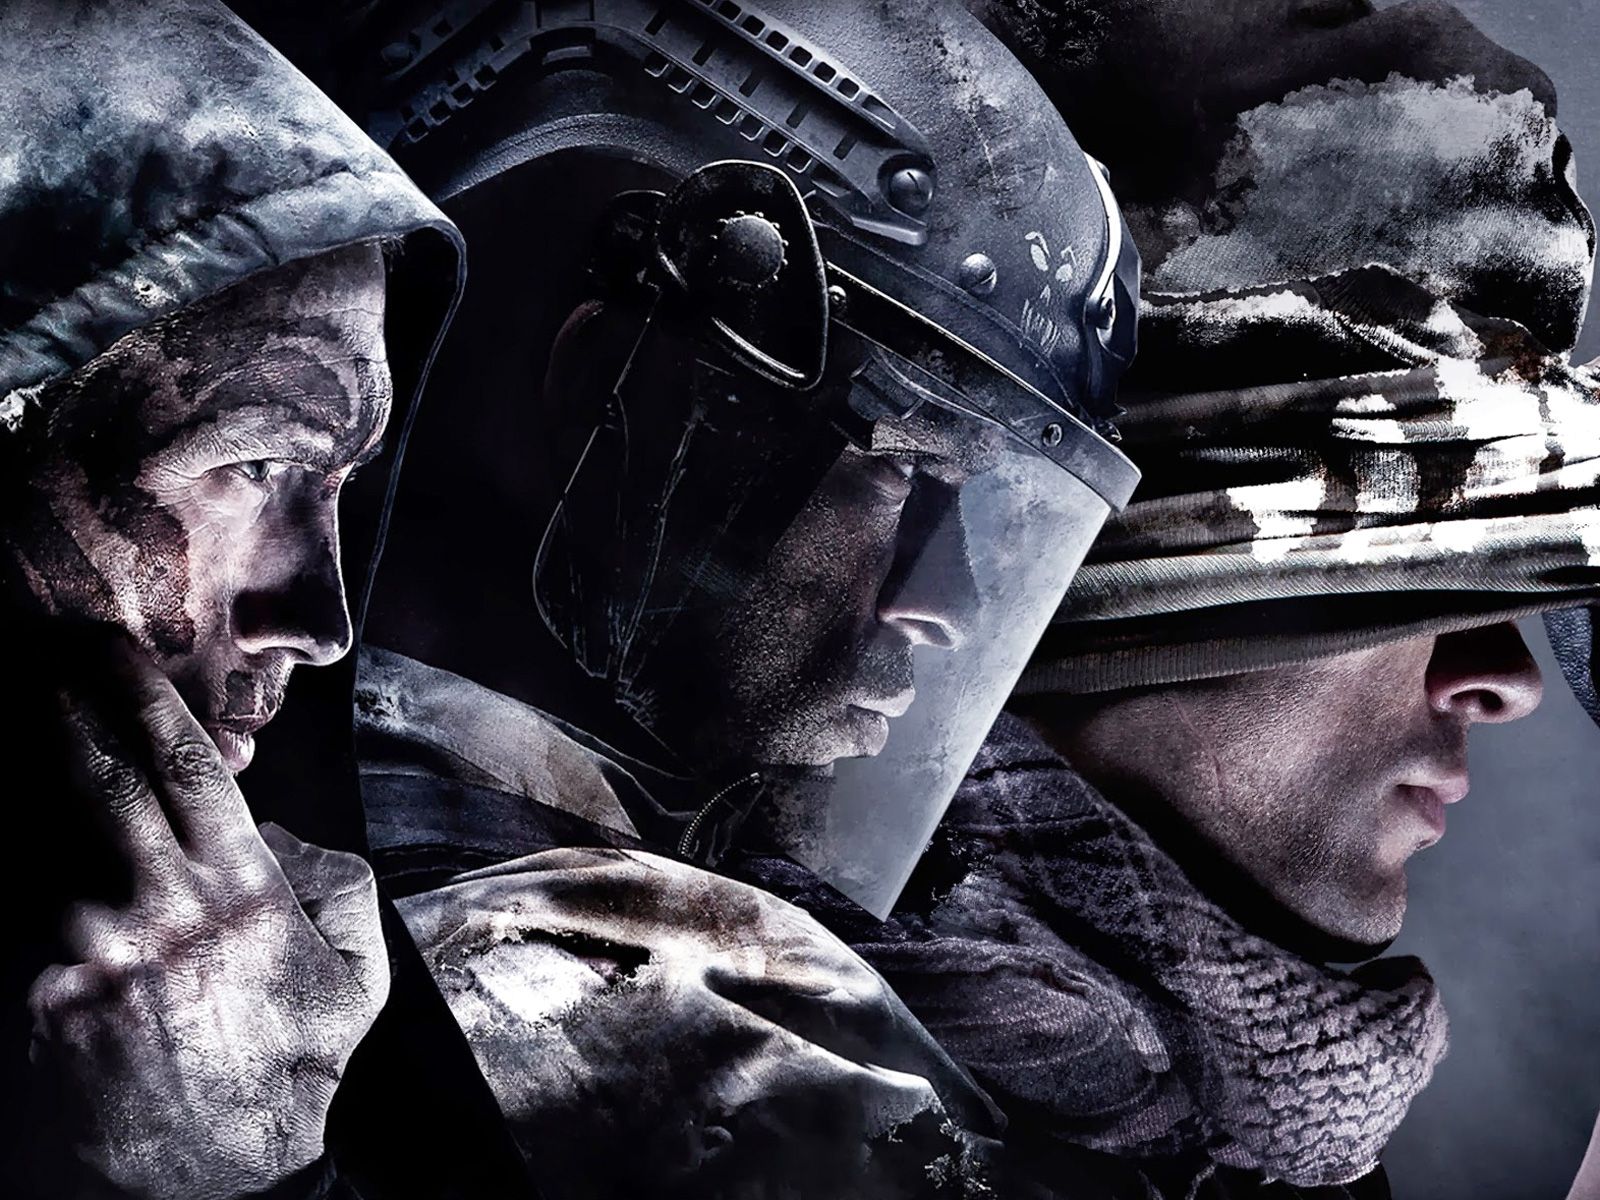 Call of Duty Ghosts Wallpapers 1600x1200 in HD cod ghosts Call